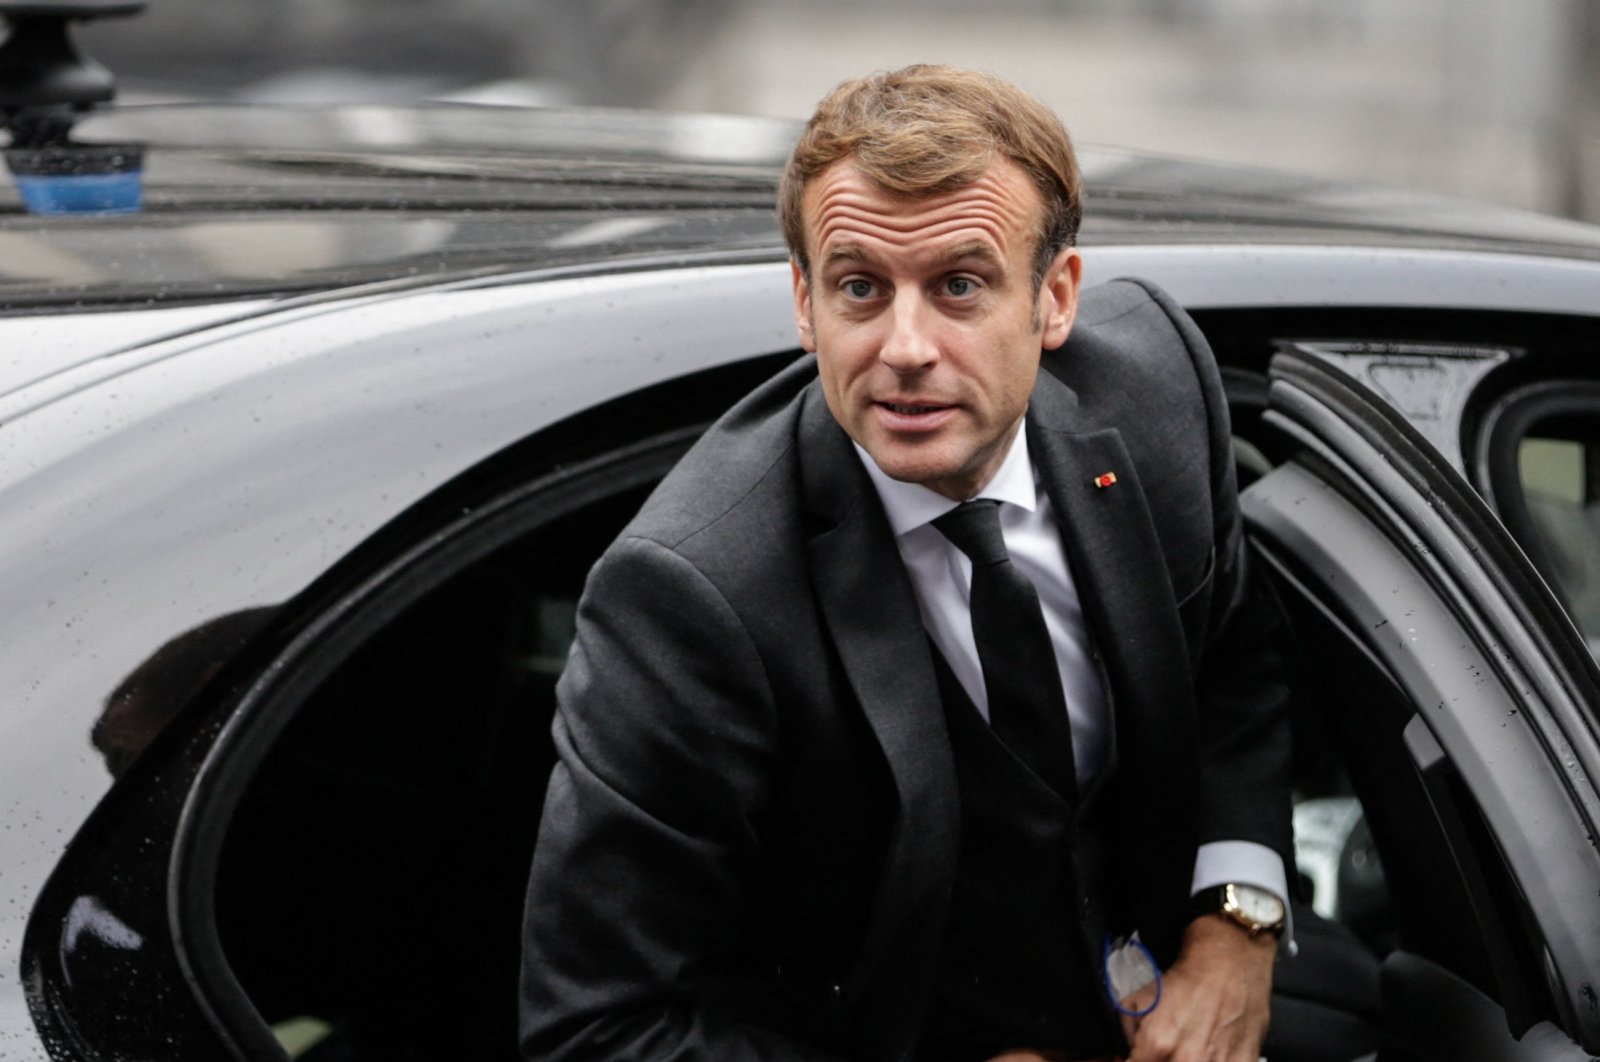 French President Emmanuel Macron arrives at the Renew Europe Pre-Summit on the first day of a European Union summit in Brussels, Belgium, Oct. 21, 2021. (AFP Photo)